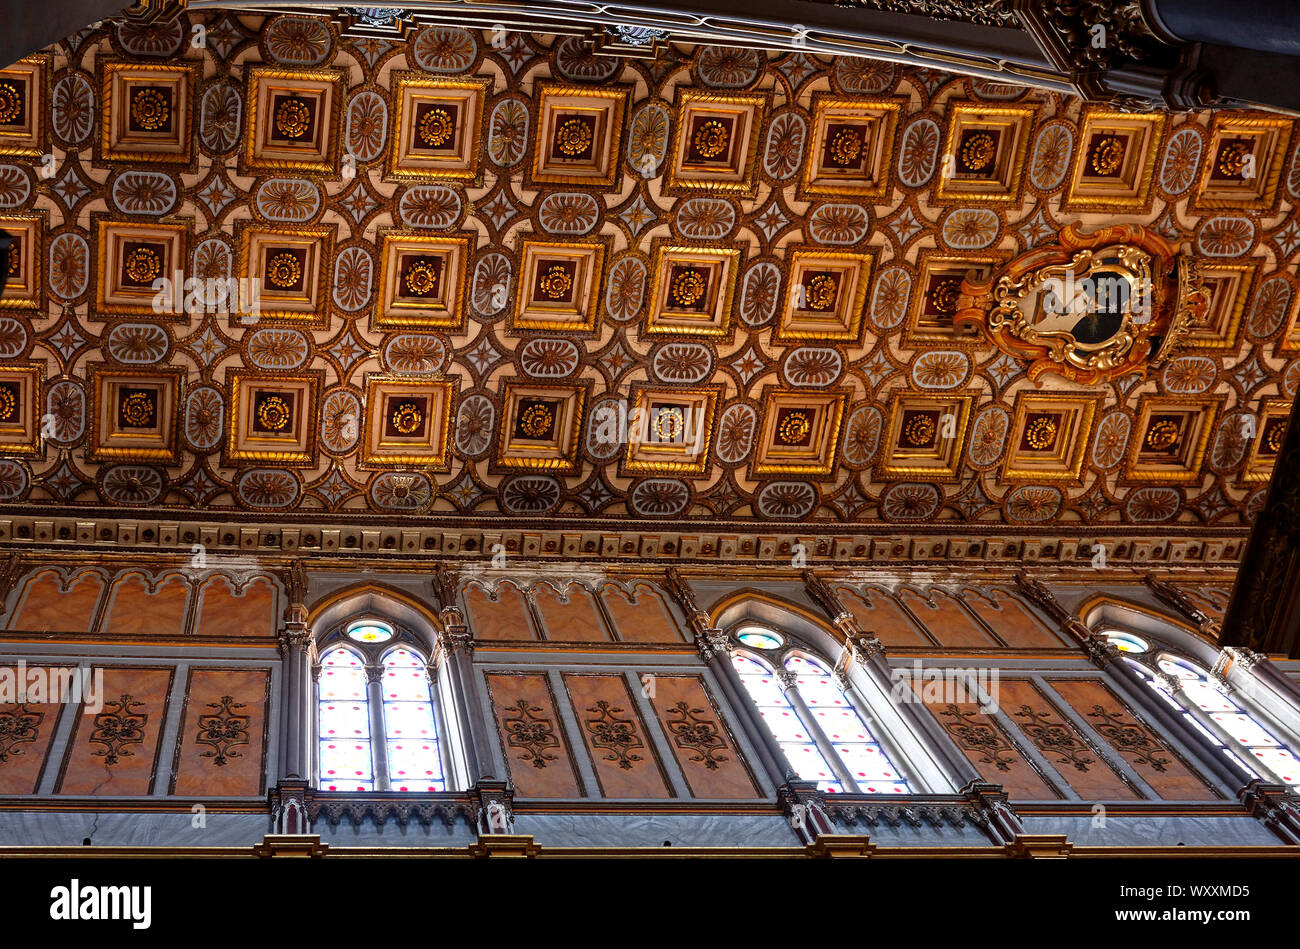 Basilica; Cathedral of the Assumption of Mary; intricate ceiling, ornate, colorful, 3 windows, Duomo; Cattedrale di San Gennaro; 14 century; Catholic; Stock Photo